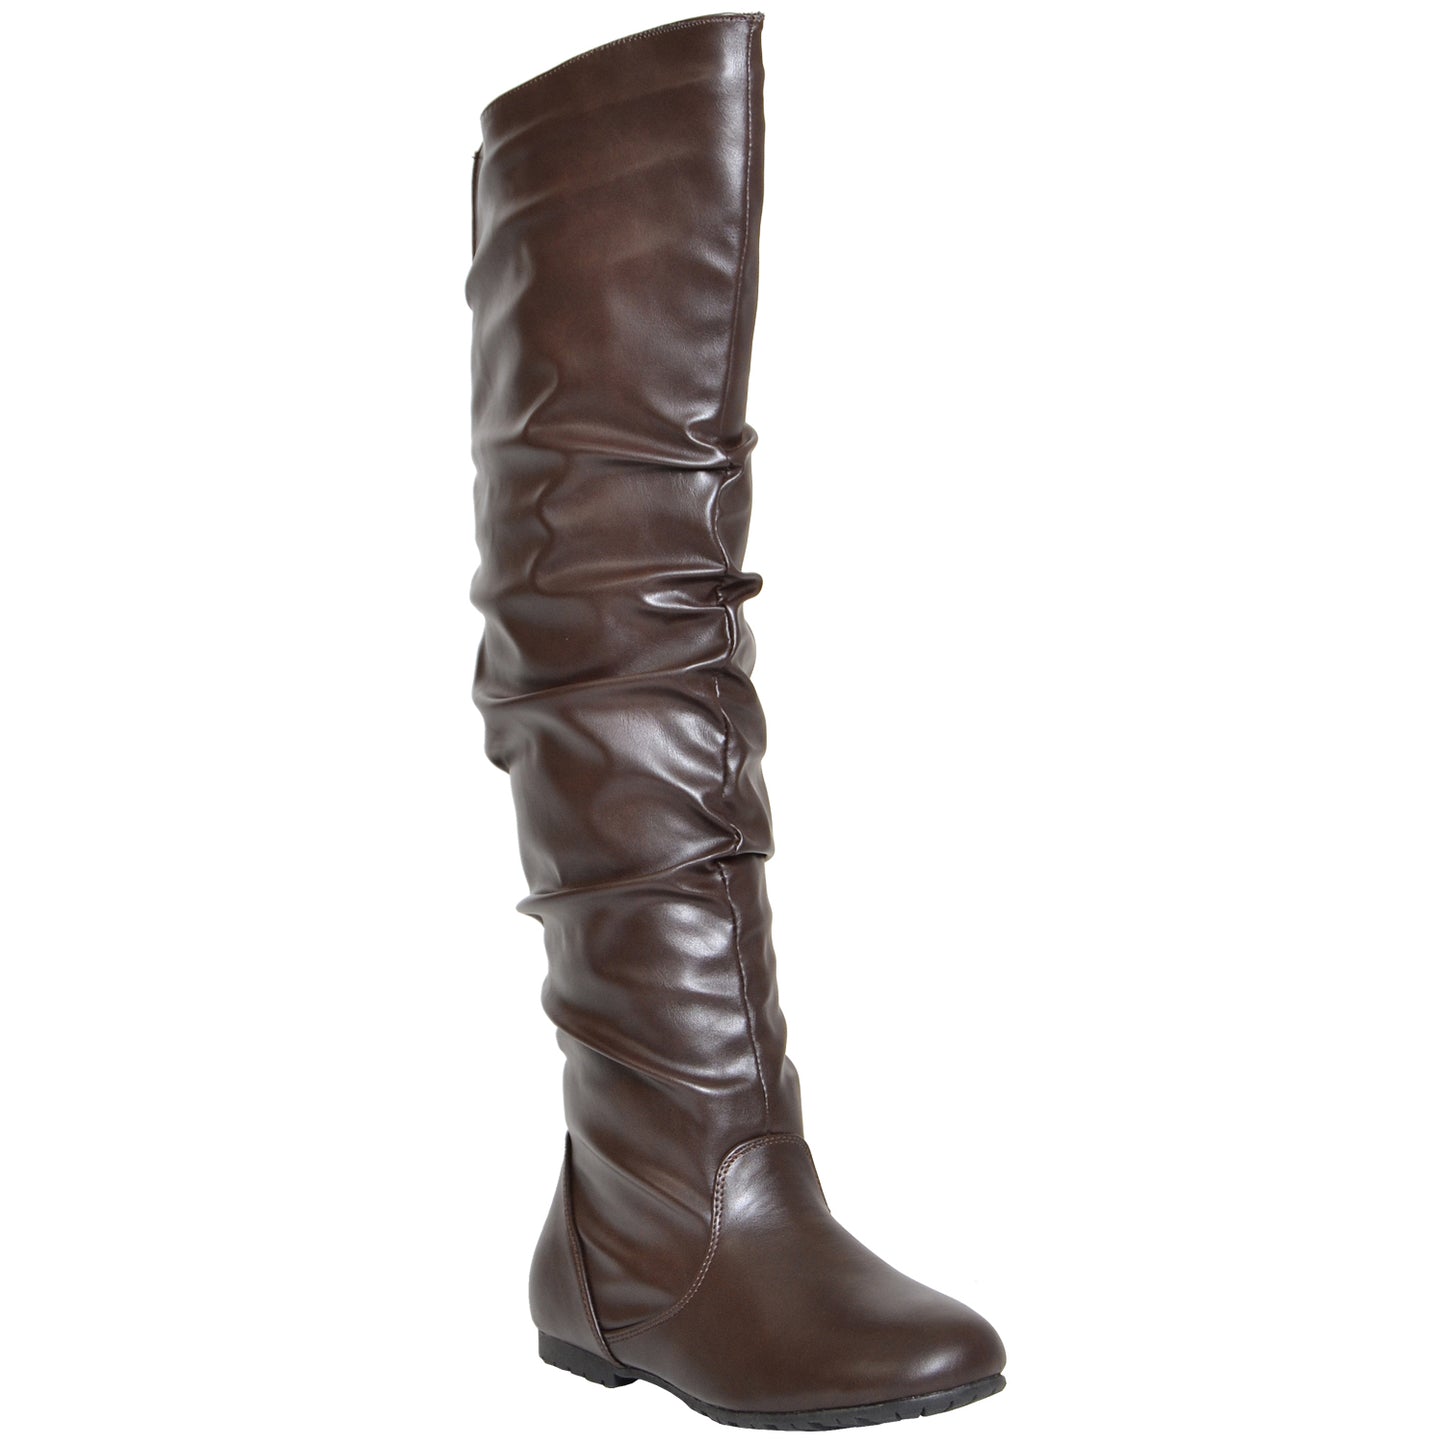 Slouch Knee High Boot